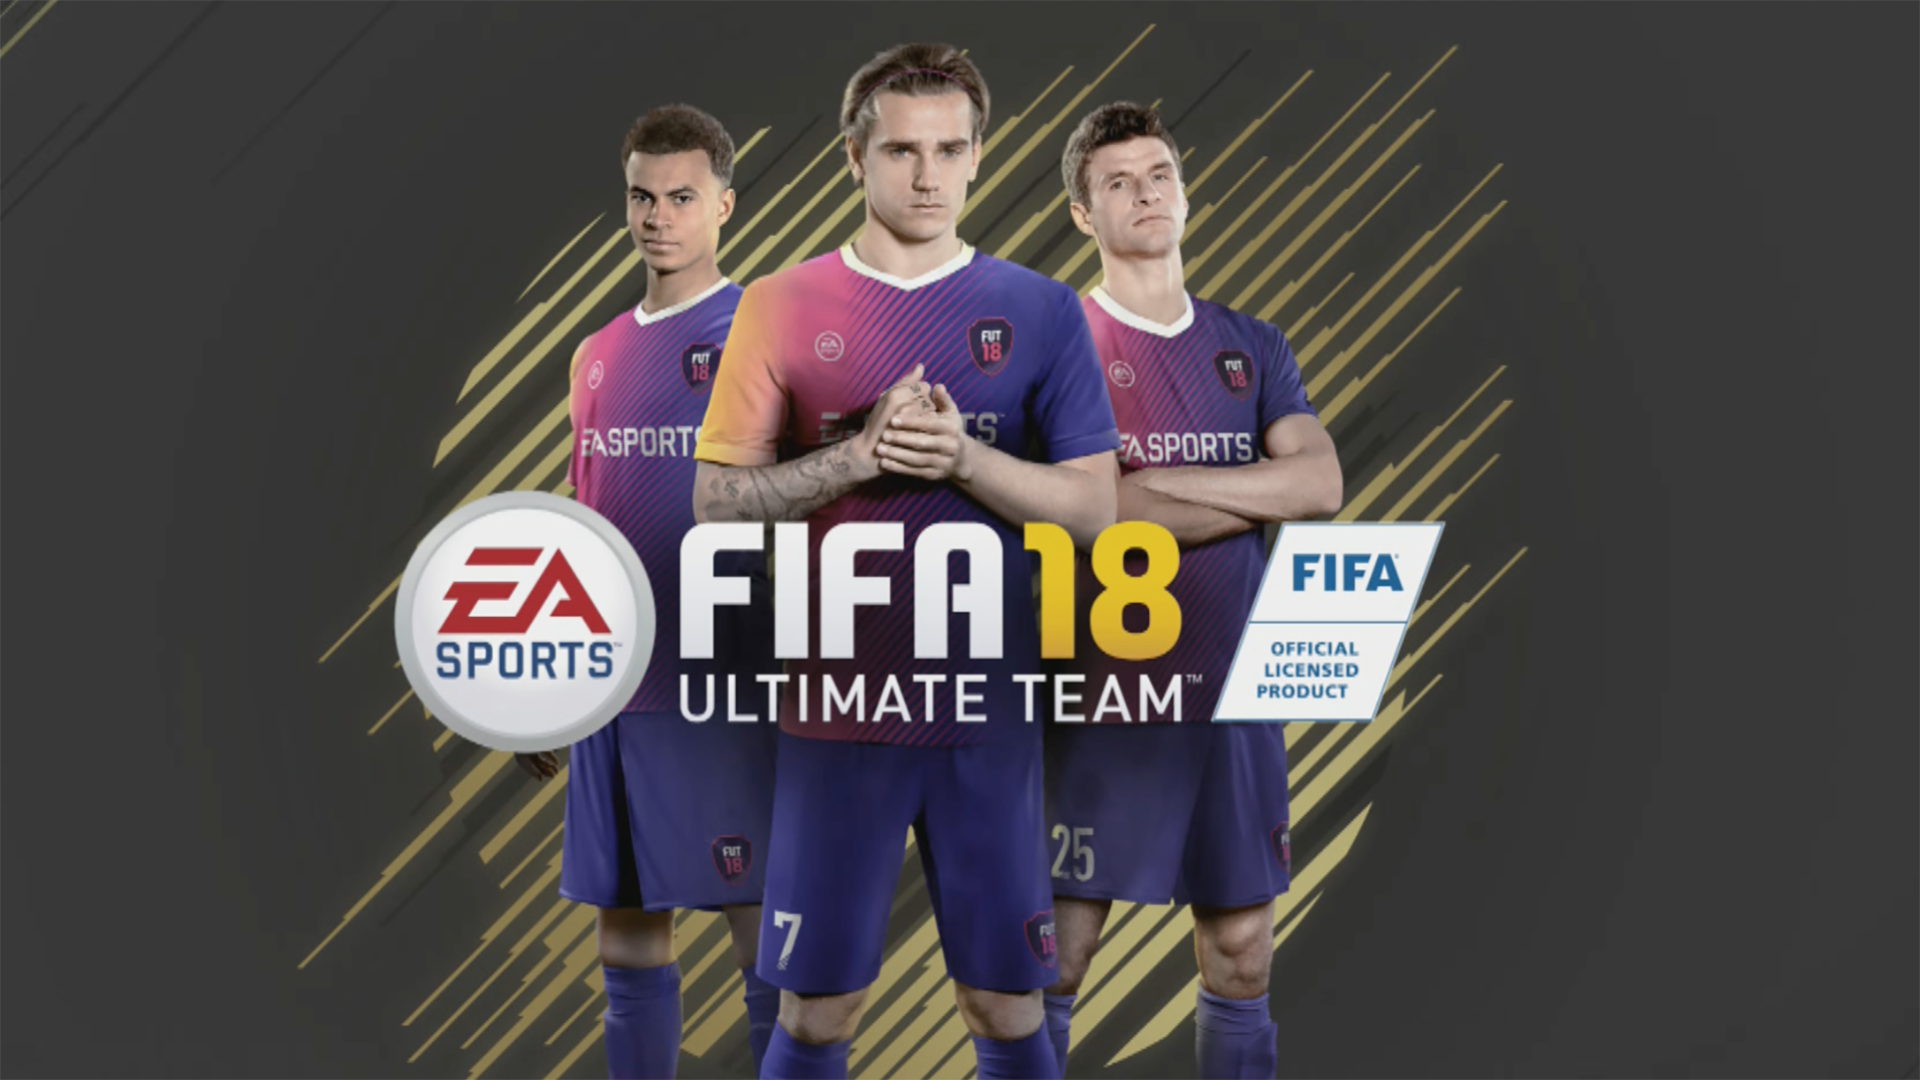 FIFA 18 Ultimate Team reveal: Icons, first gameplay and new FUT features unveiled in ...1920 x 1080